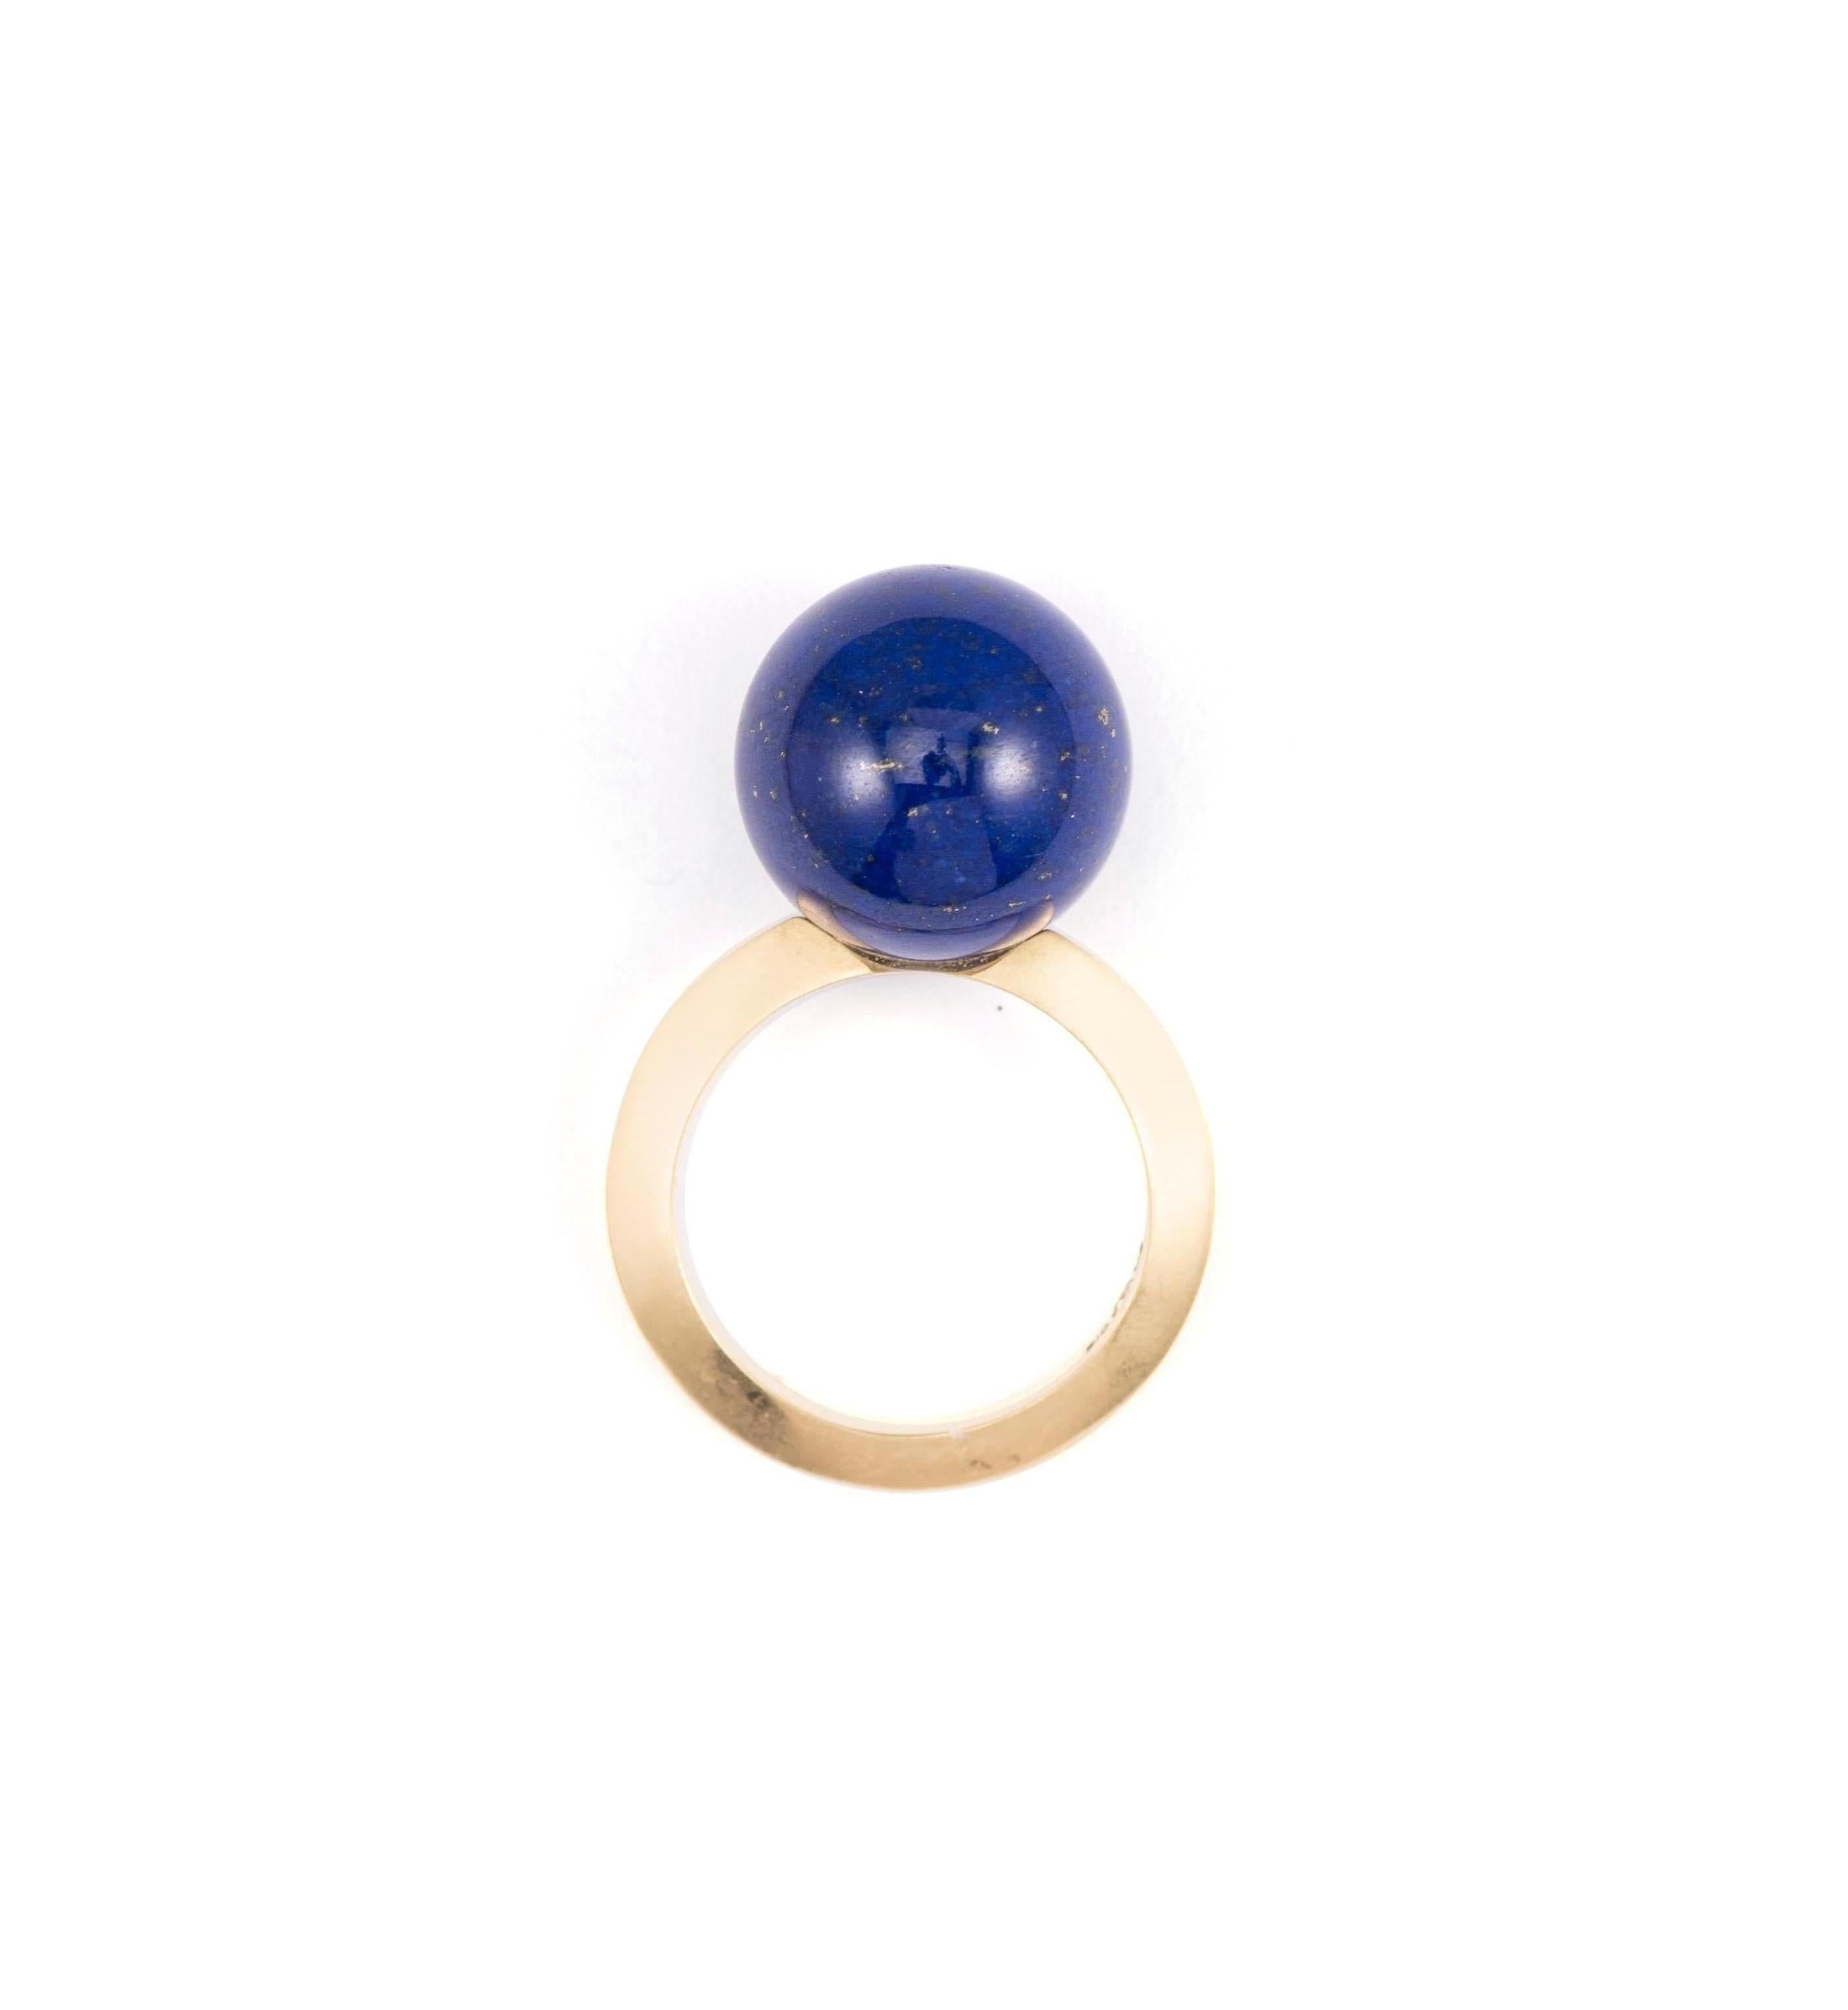 This playful ring can be stacked with our Green Jade Ball Ring, also listed!  Or wear alone to add a pop of vibrant blue to your outfit.  A great style for summertime!

14mm Spherical Lapis Lazuli with 18k yellow gold

Finger size 6.50

Los